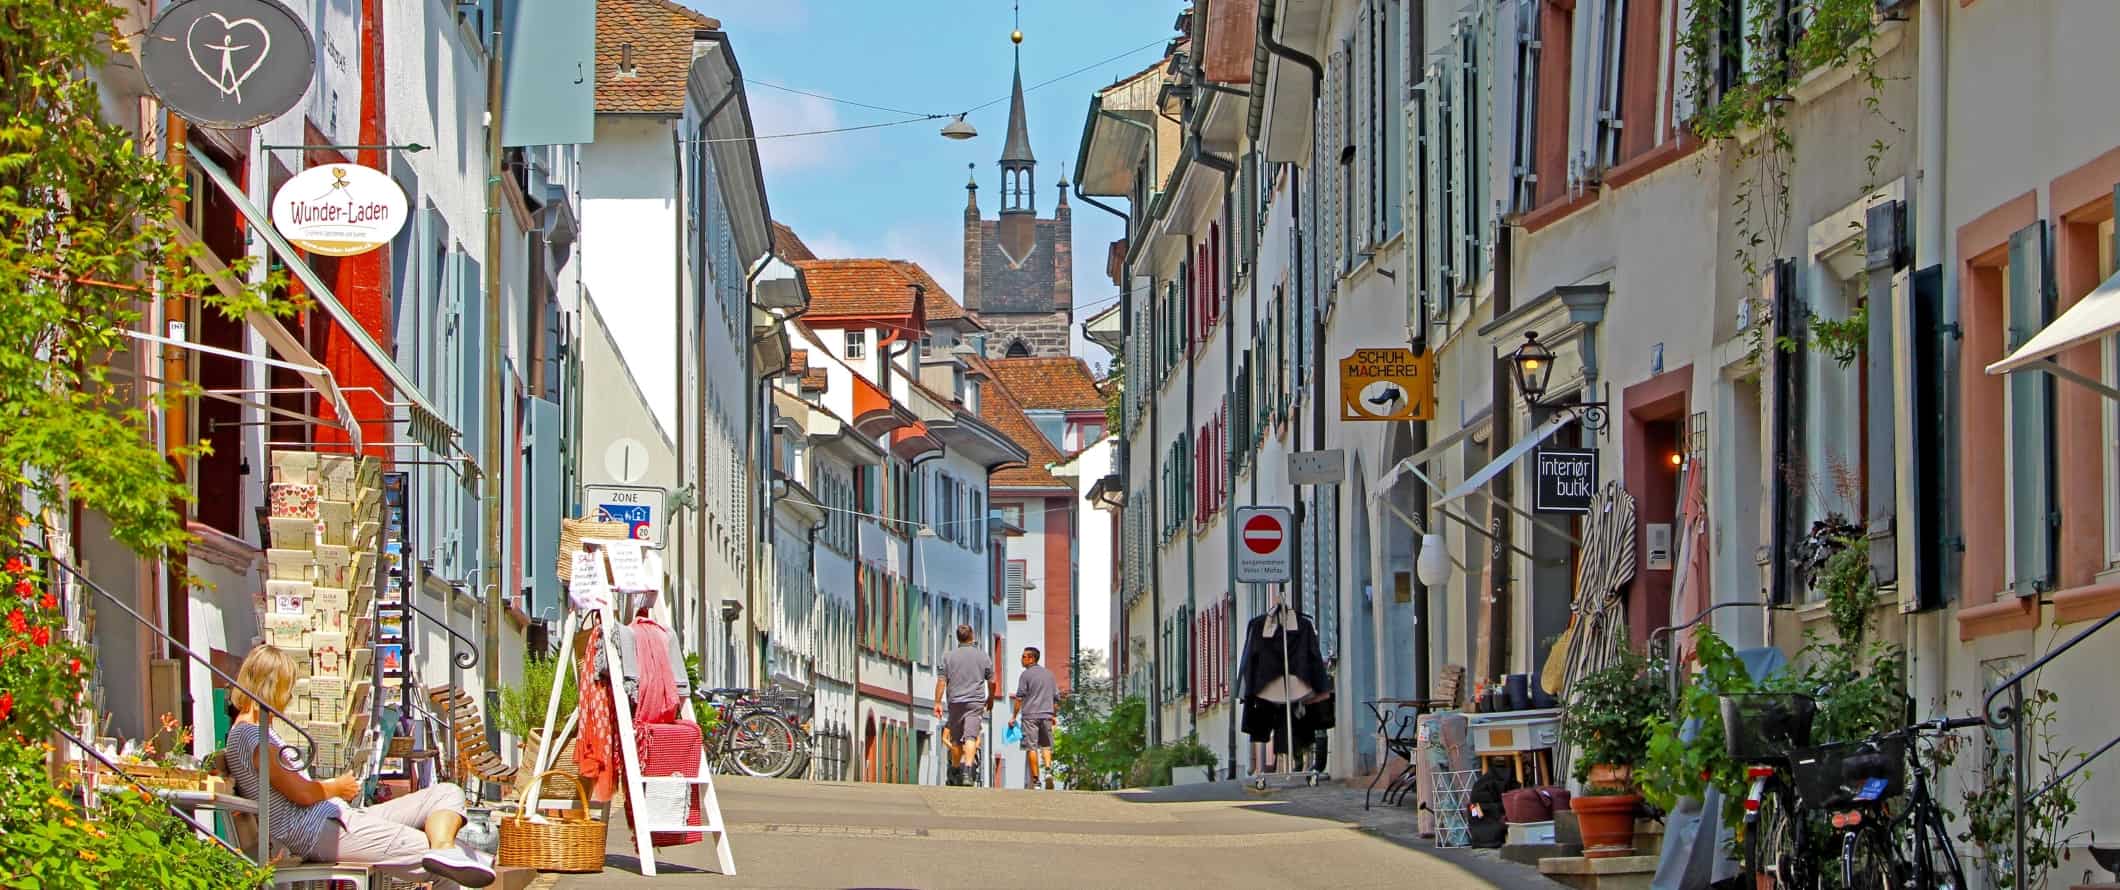 A street lined with white buildings with brightly colored shutters in the historic center of Basel, Switzerland